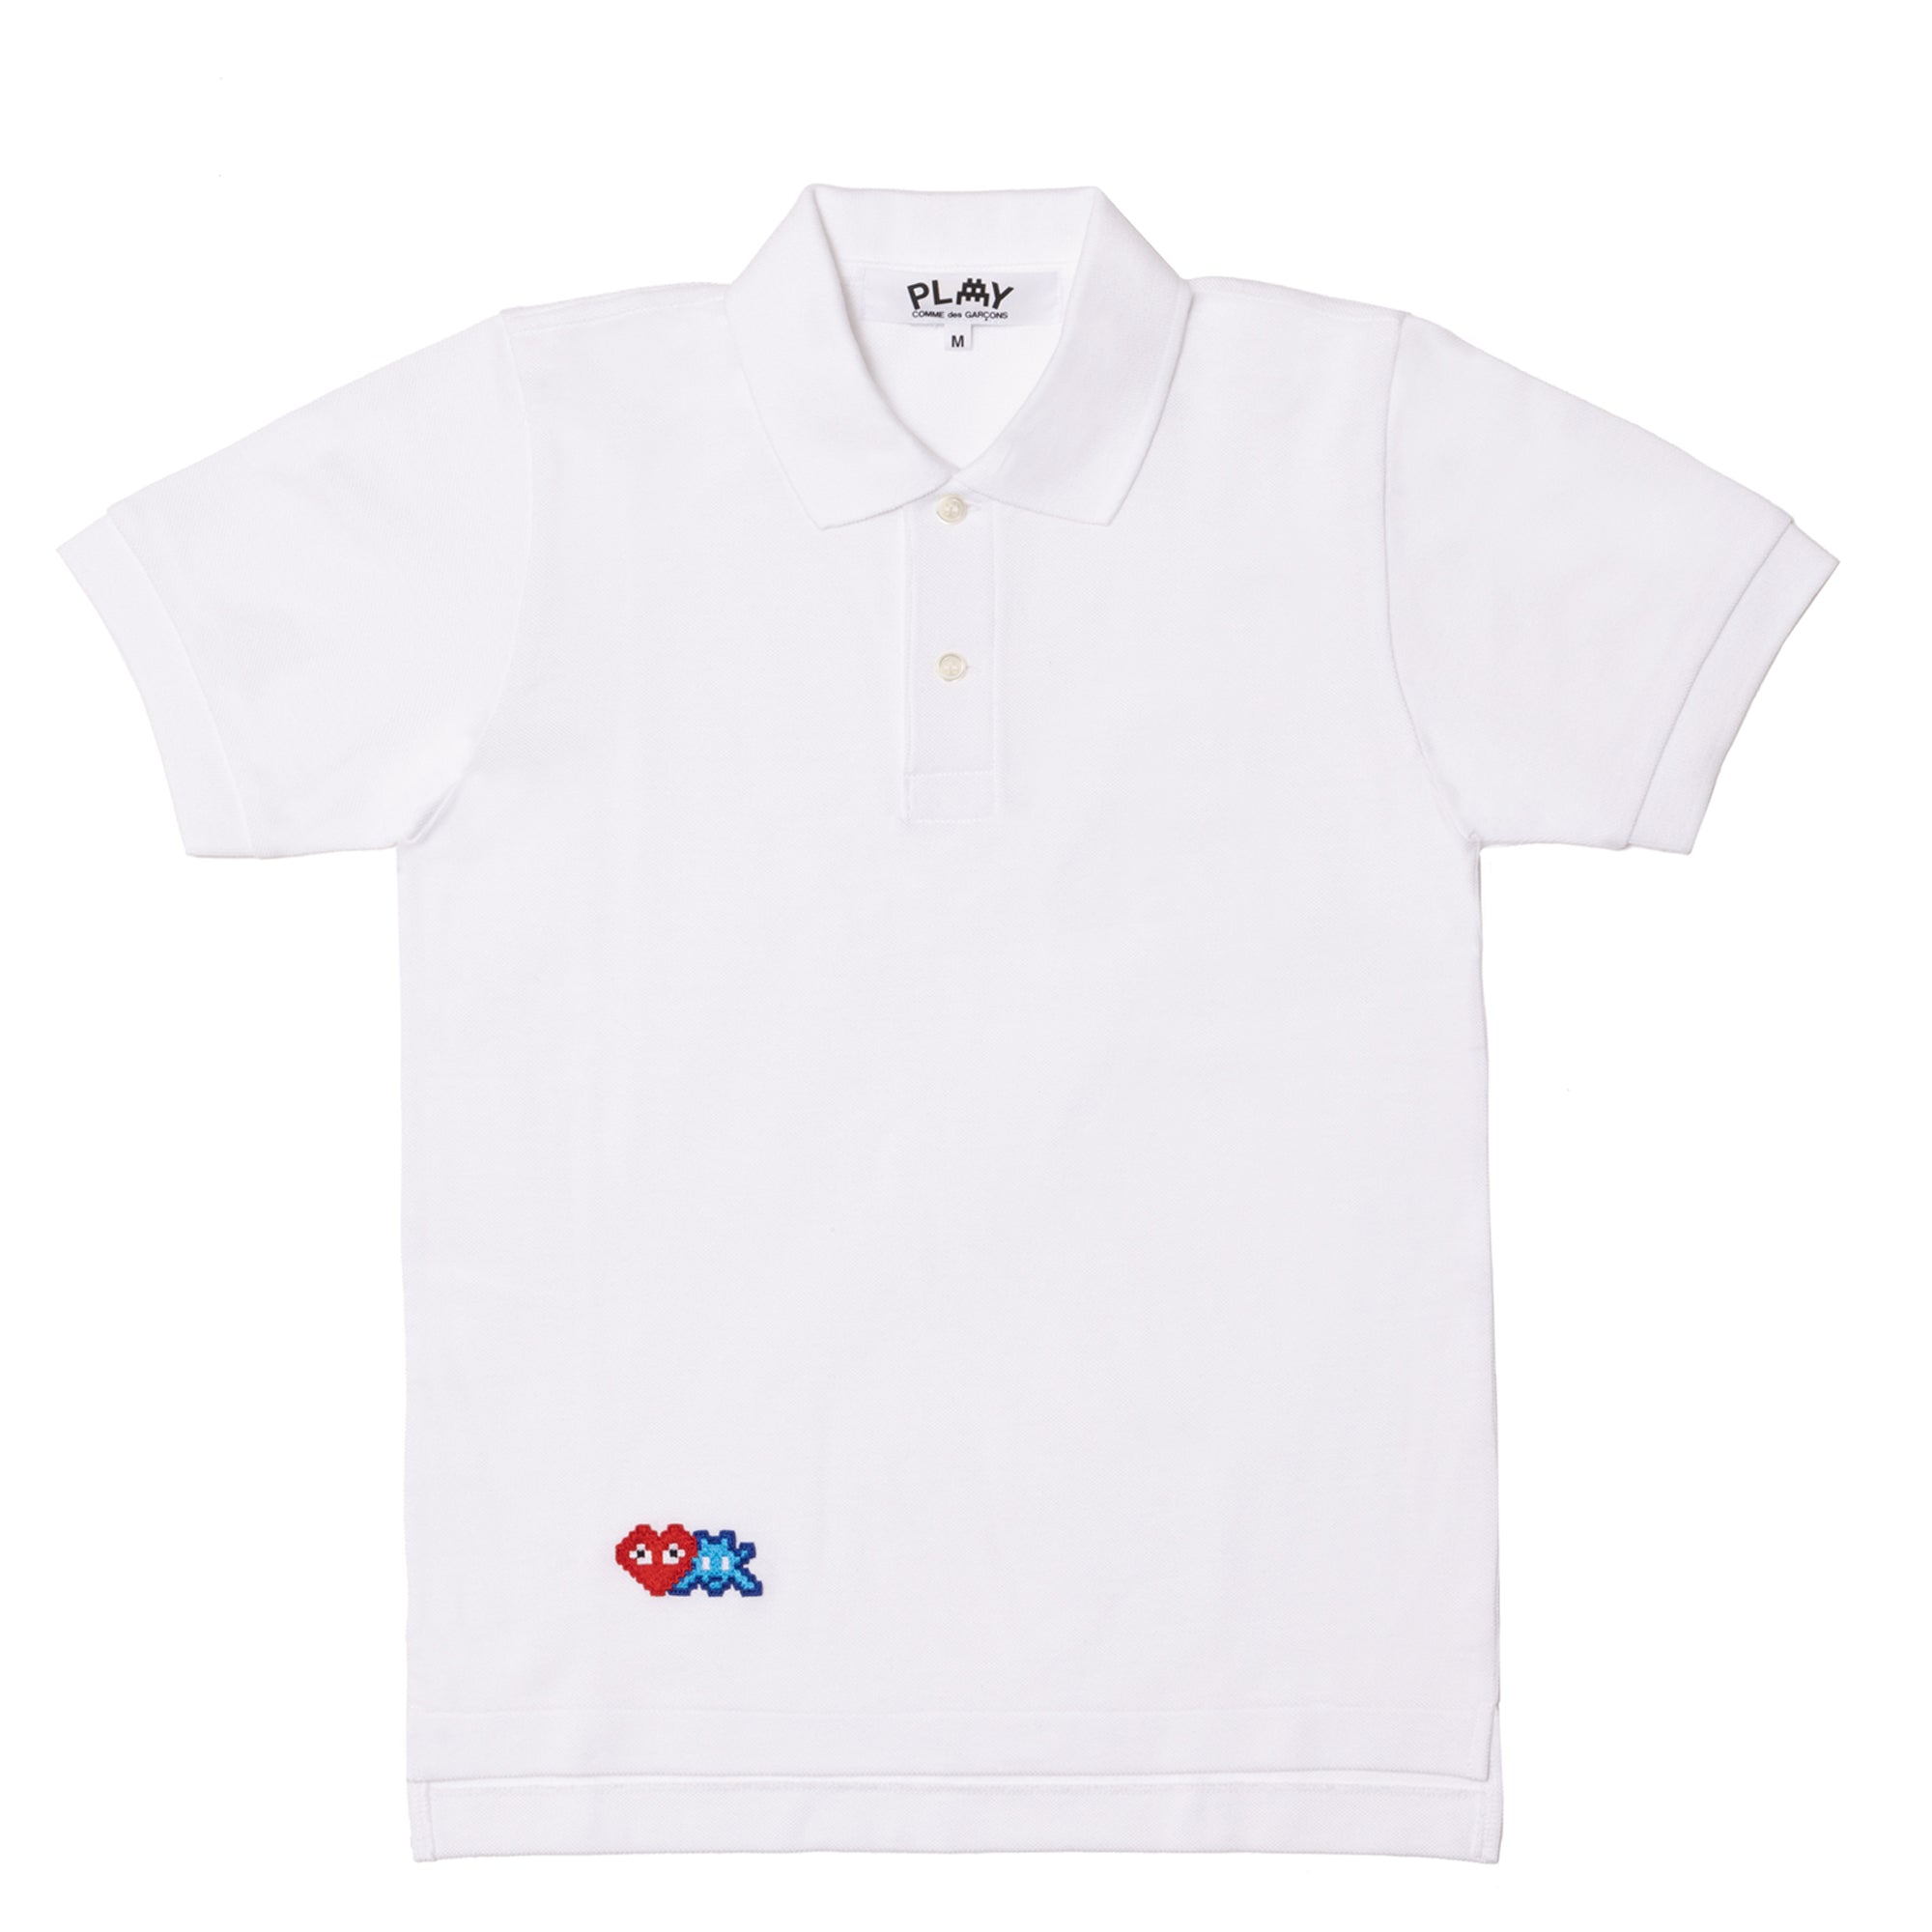 PLAY CDG - INVADER Polo Shirt - (White) view 1